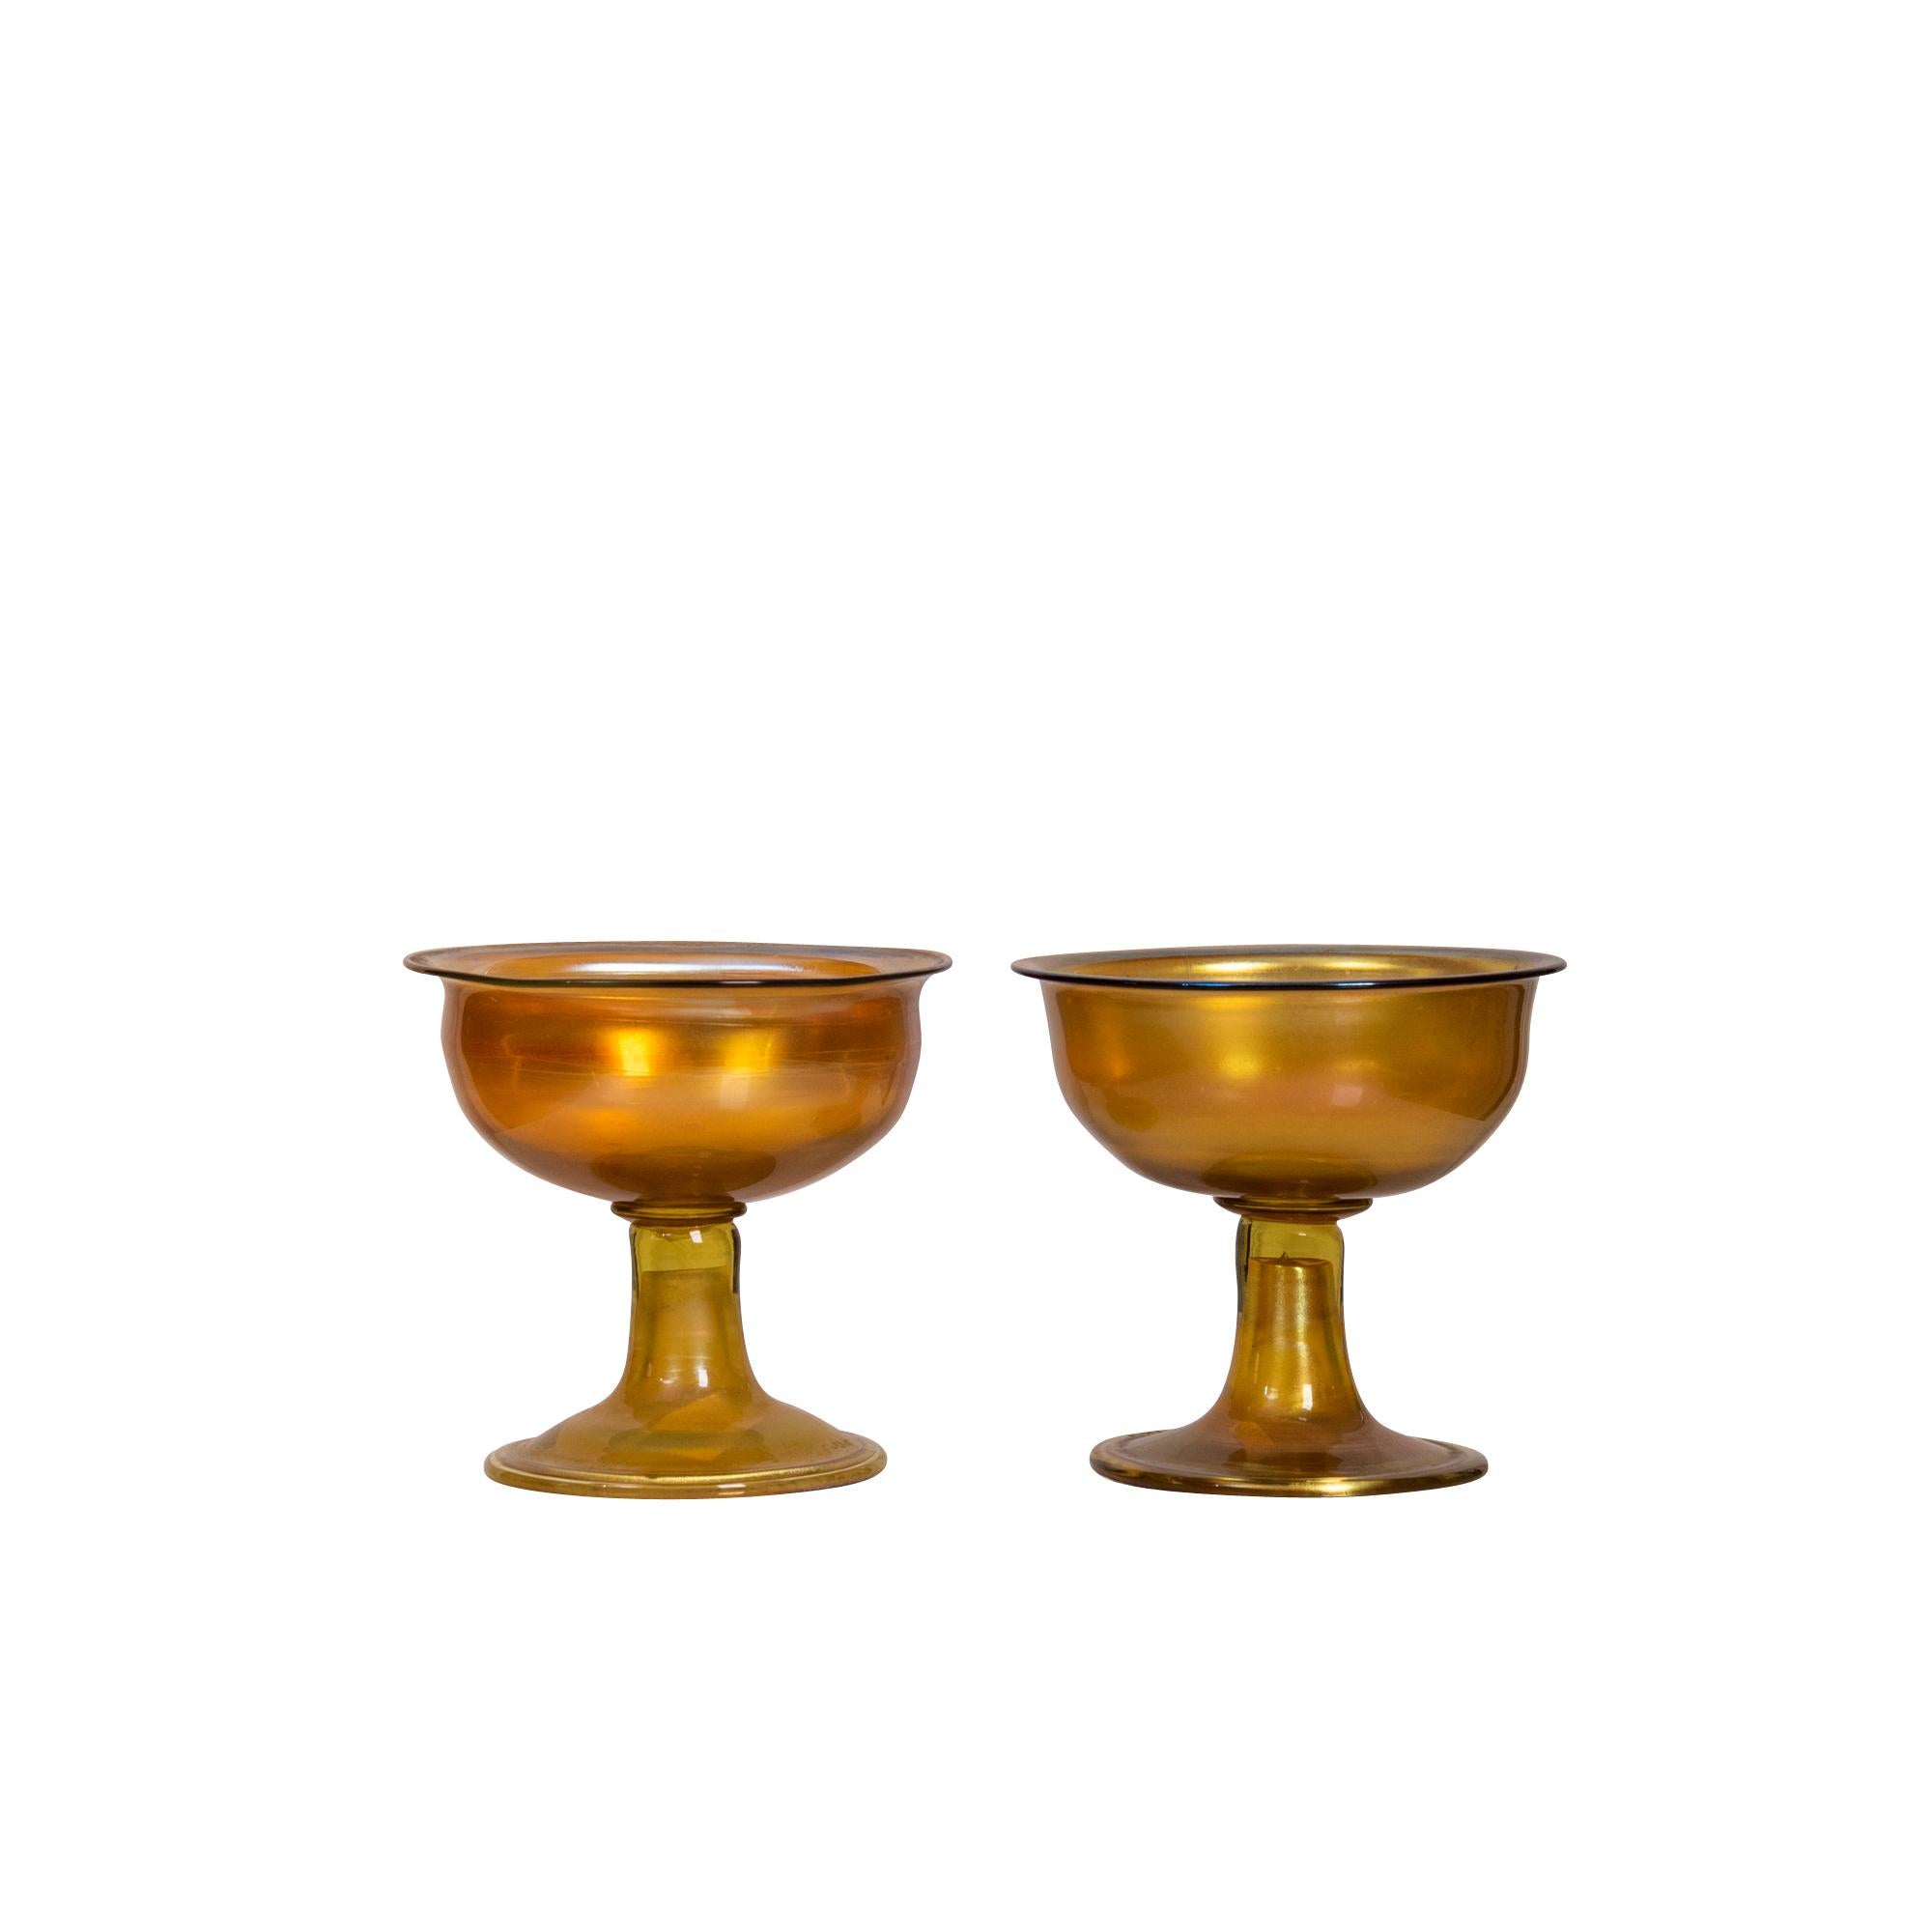 Pair of Tiffany Studios Gold Favrile Glass Sherbets In Good Condition For Sale In West Palm Beach, FL